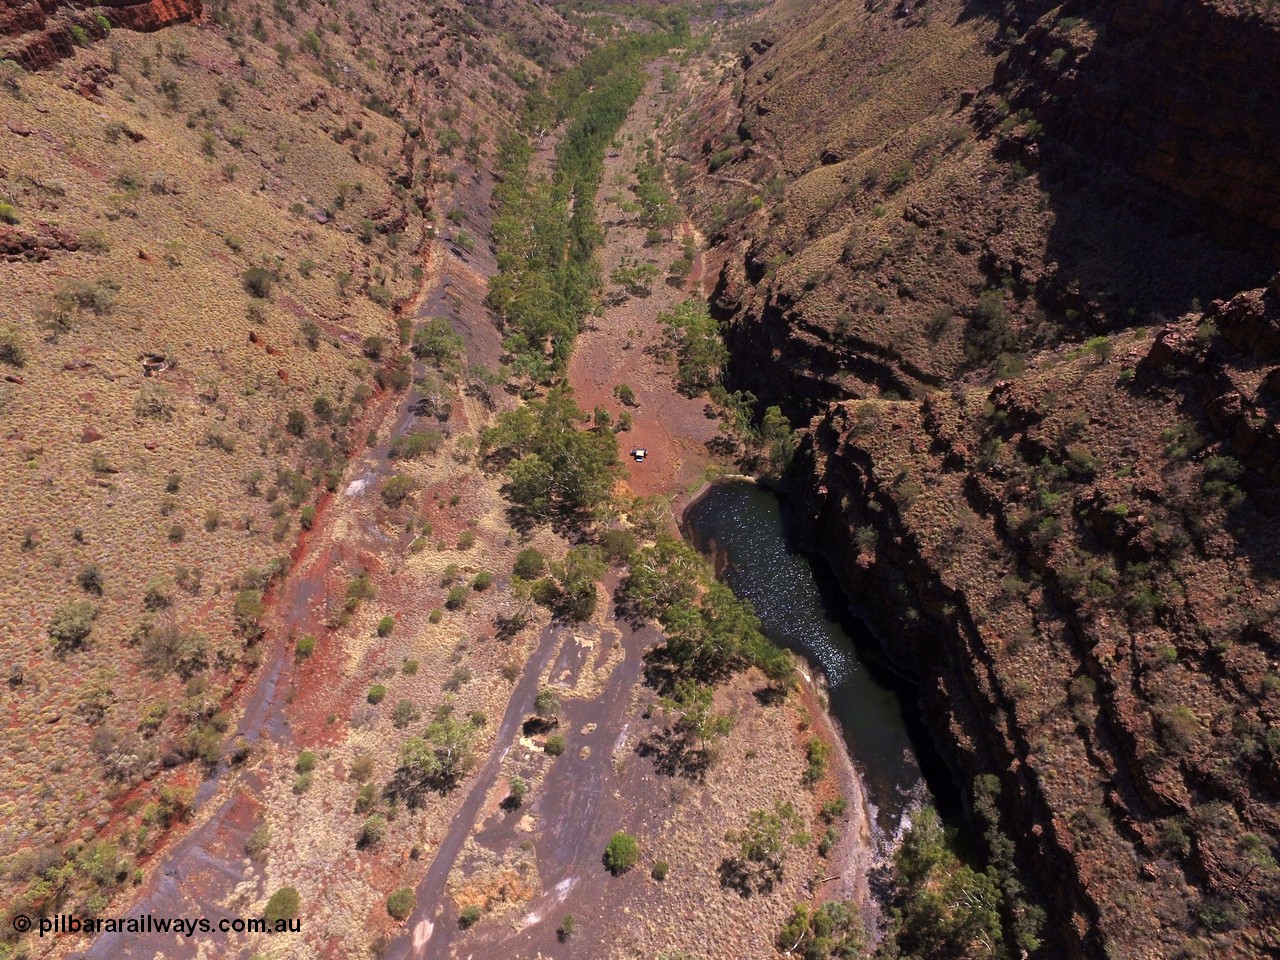 160101 DJI 0015
Wittenoom Gorge, view from above the Gorge Mine area and pool, looking north east, campers at pool, the drive can be seen cutting up the left side of the gorge. [url=https://goo.gl/maps/cYjHMK3d4myacmRN6]Geodata[/url].
